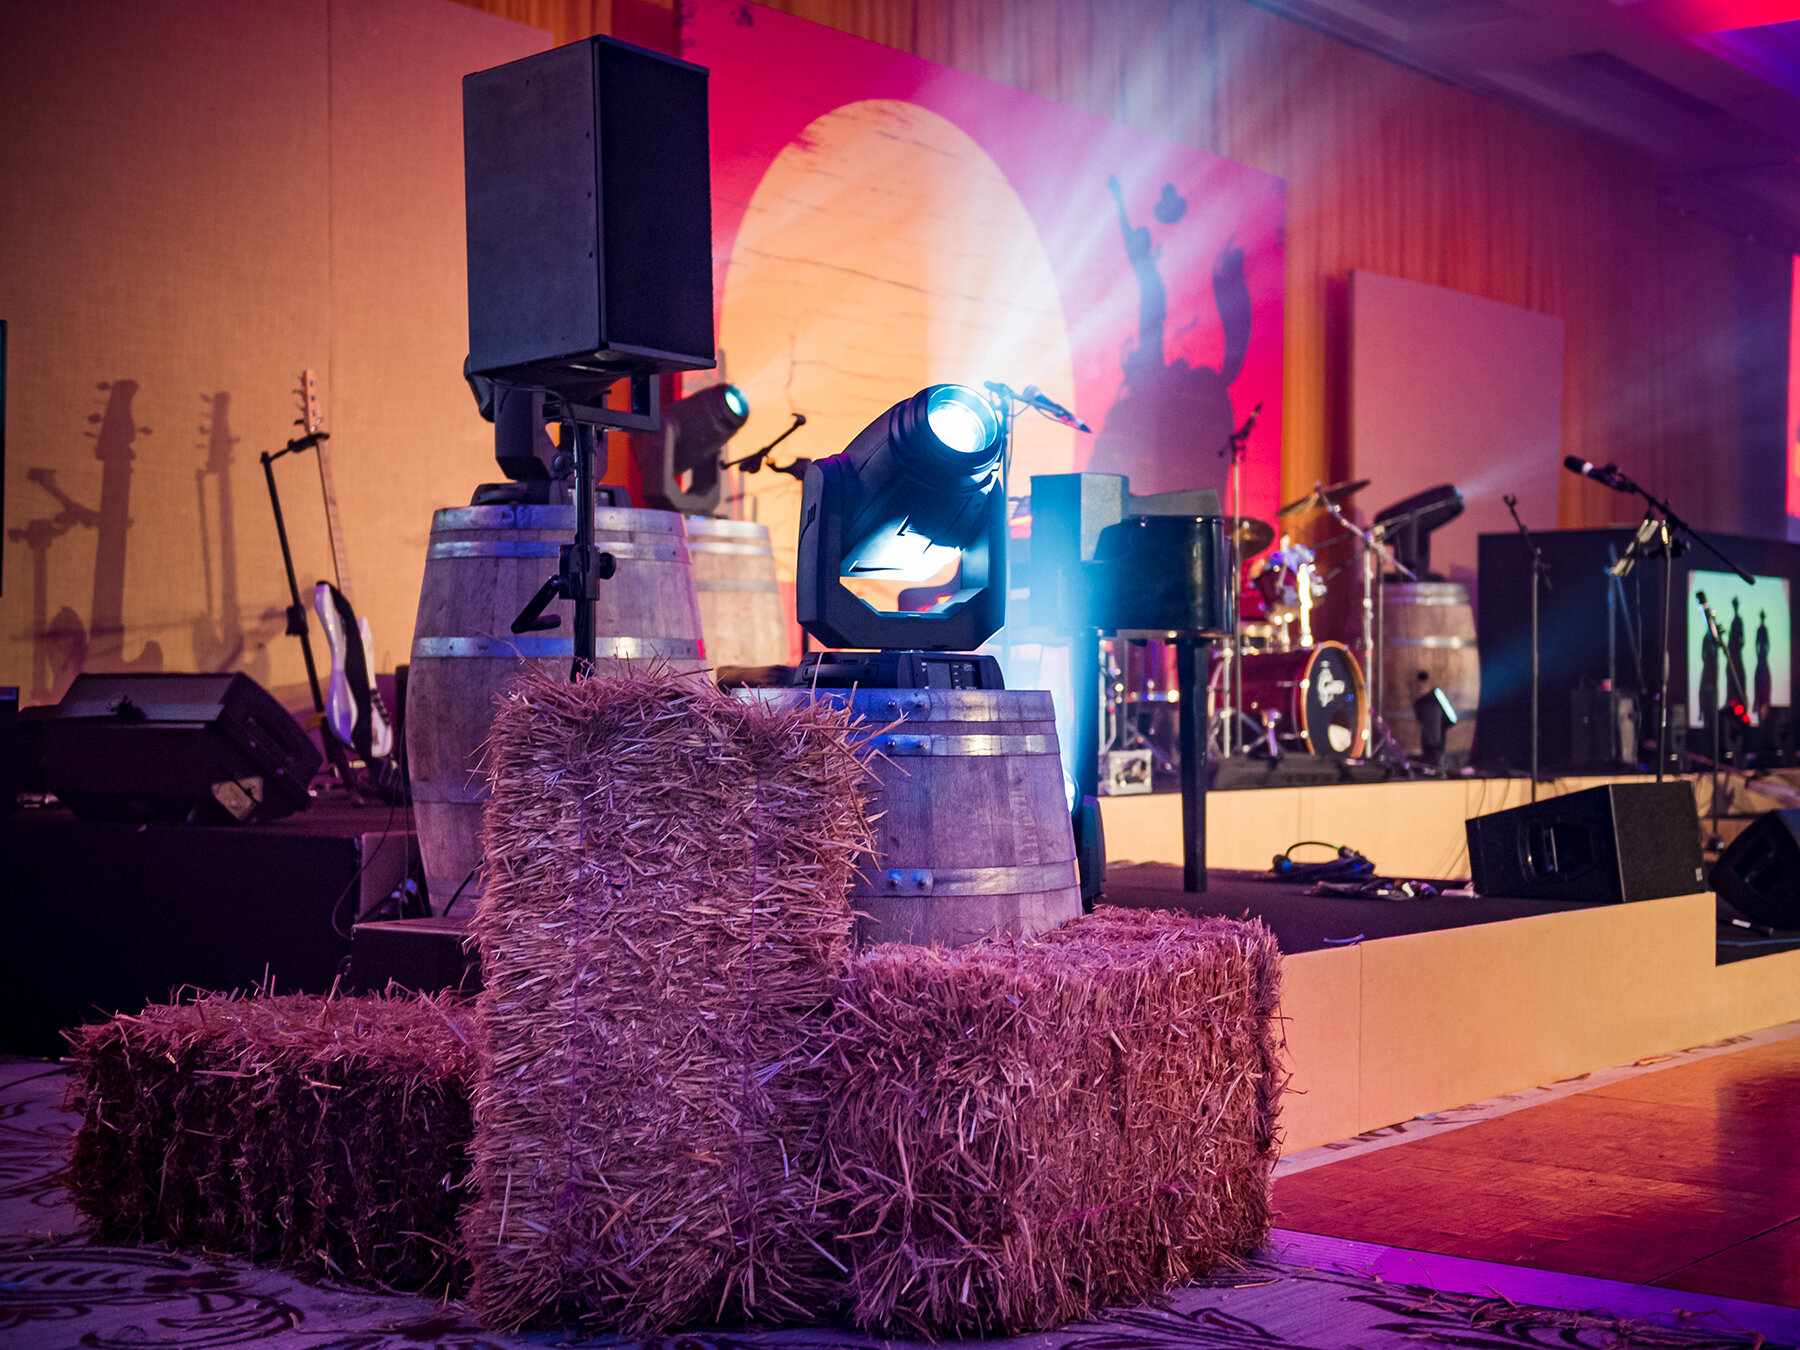 reveries-events-brighton-grand-hotel-coporate-party-design-lighting-sound-staging-branding-technical-production-themed-country-western.jpg